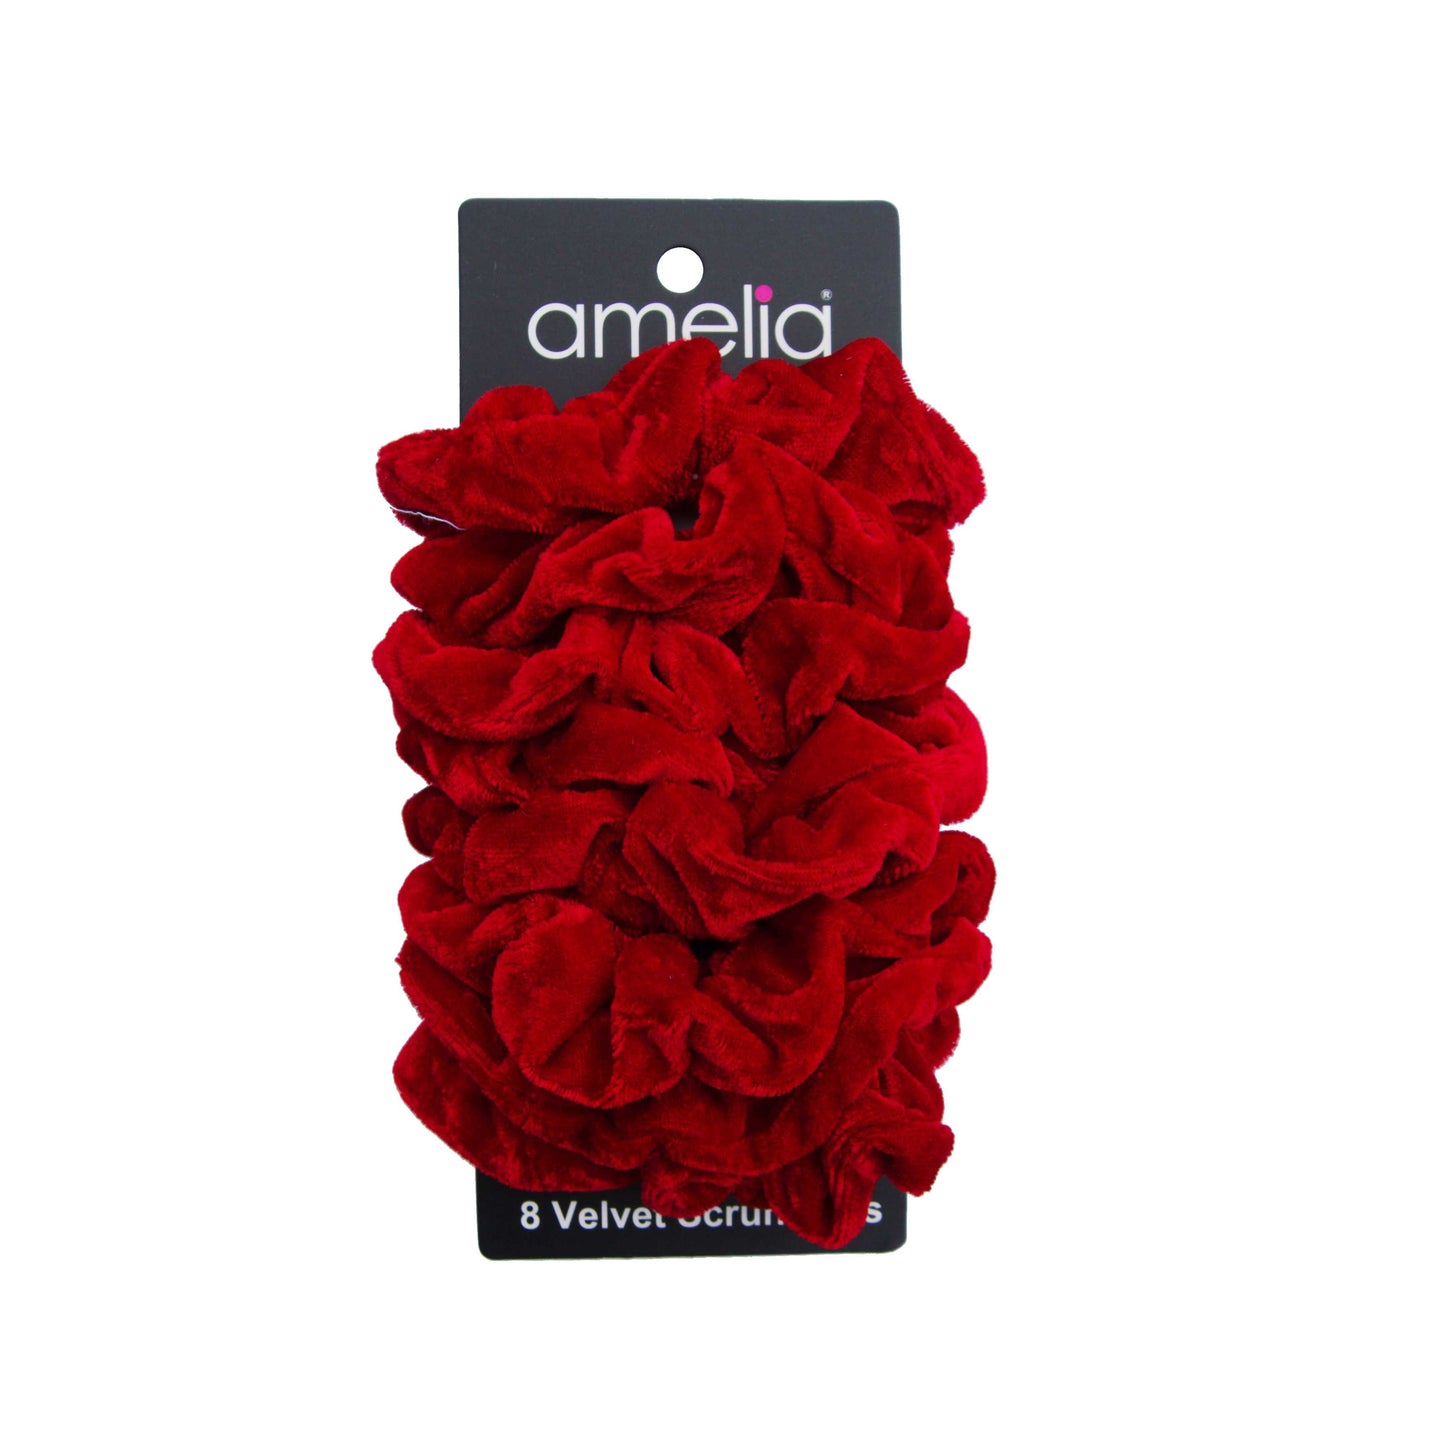 Amelia Beauty, Red Velvet Scrunchies, 3.5in Diameter, Gentle on Hair, Strong Hold, No Snag, No Dents or Creases. 8 Pack